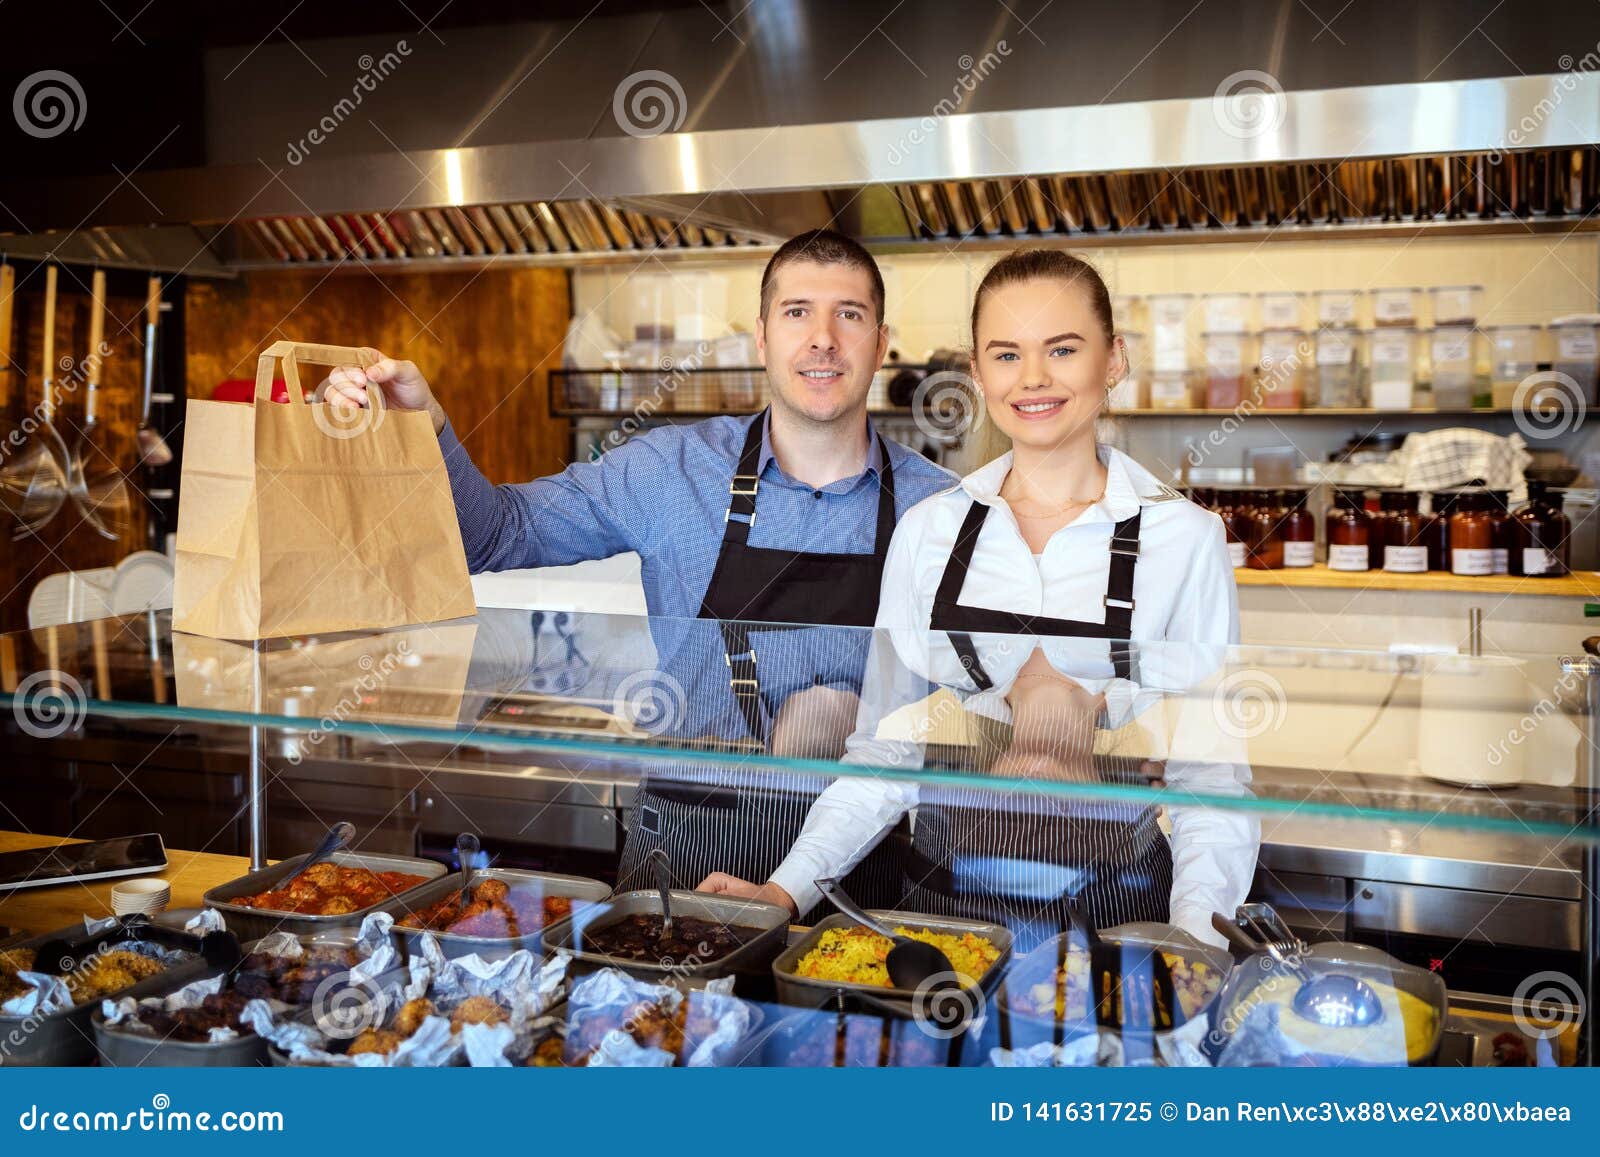 portrait of small business owner smiling behind counter inside eatery holding food order for home delivery